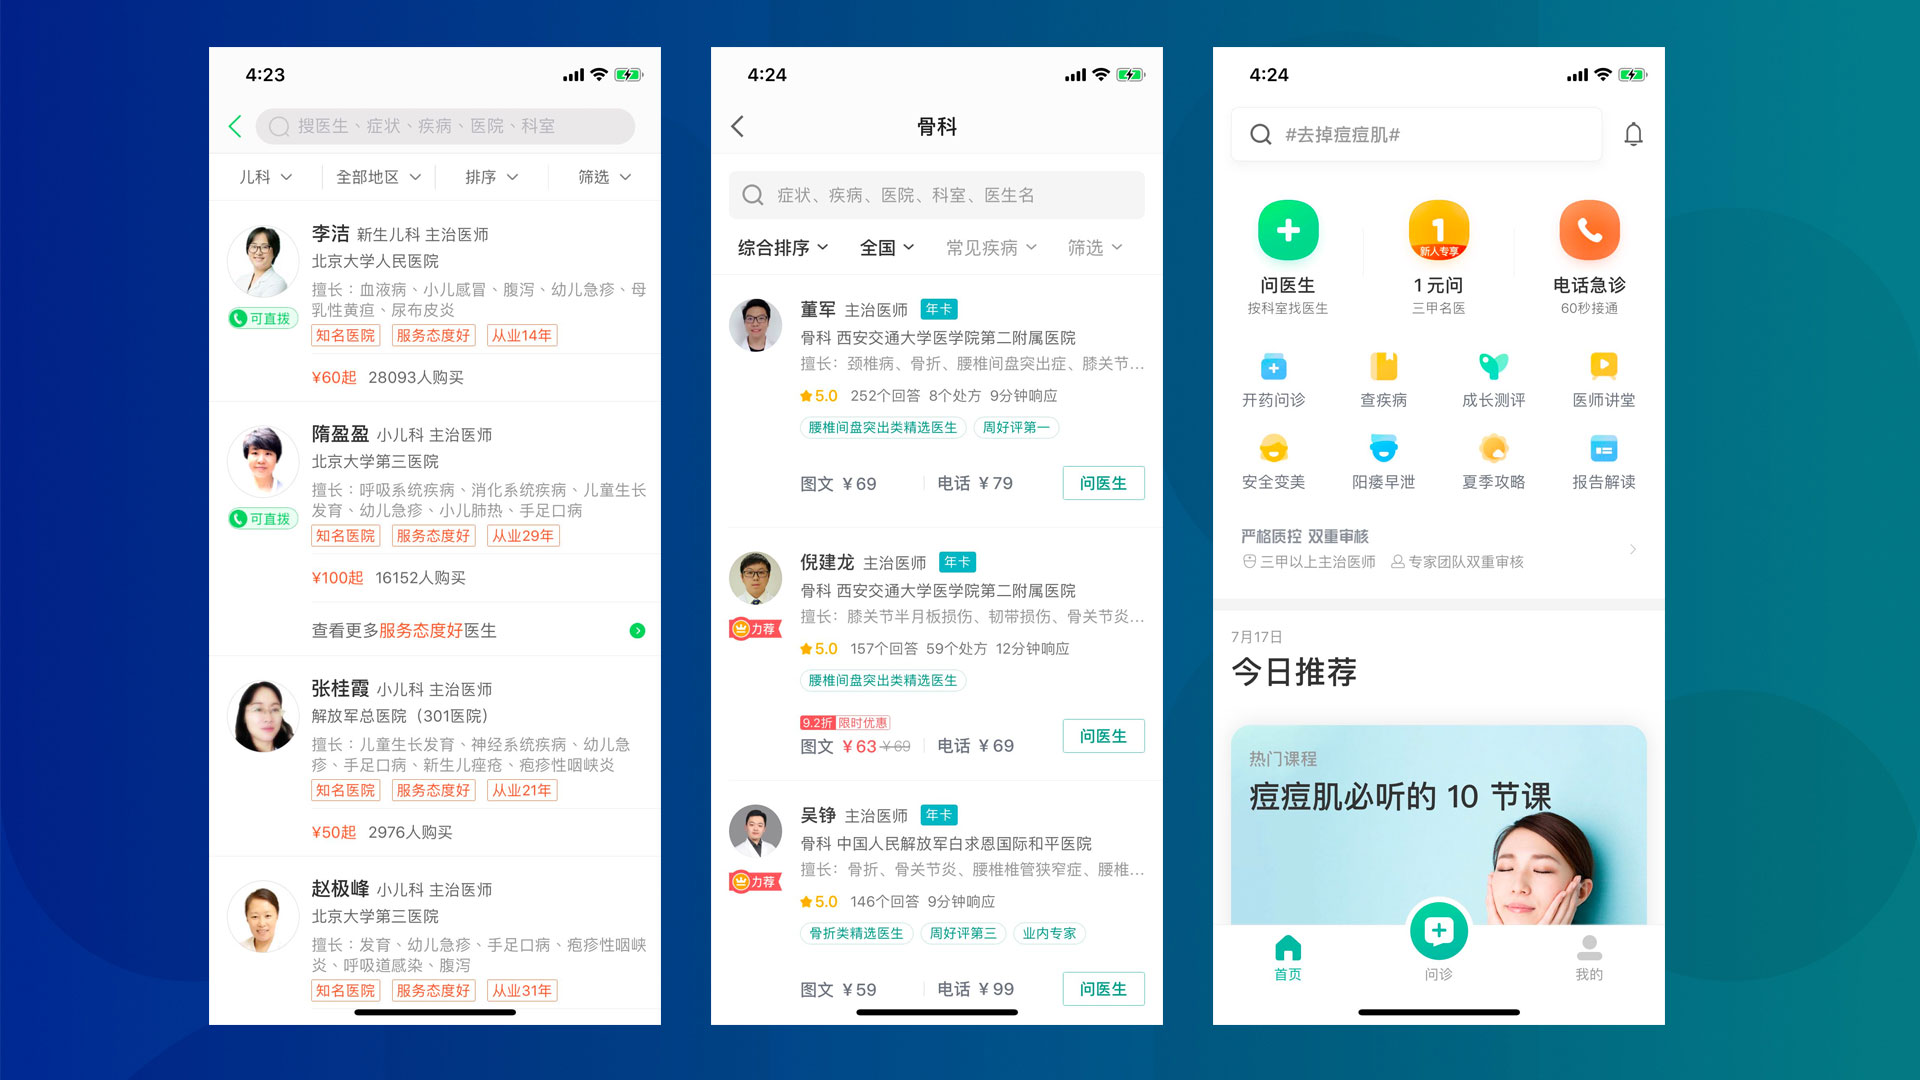 Apps like Chunyu Yisheng and Dingxiang Yisheng provide online consultation from doctors around the country. (Picture: Chunyu Yisheng/Dingxiang Yisheng)